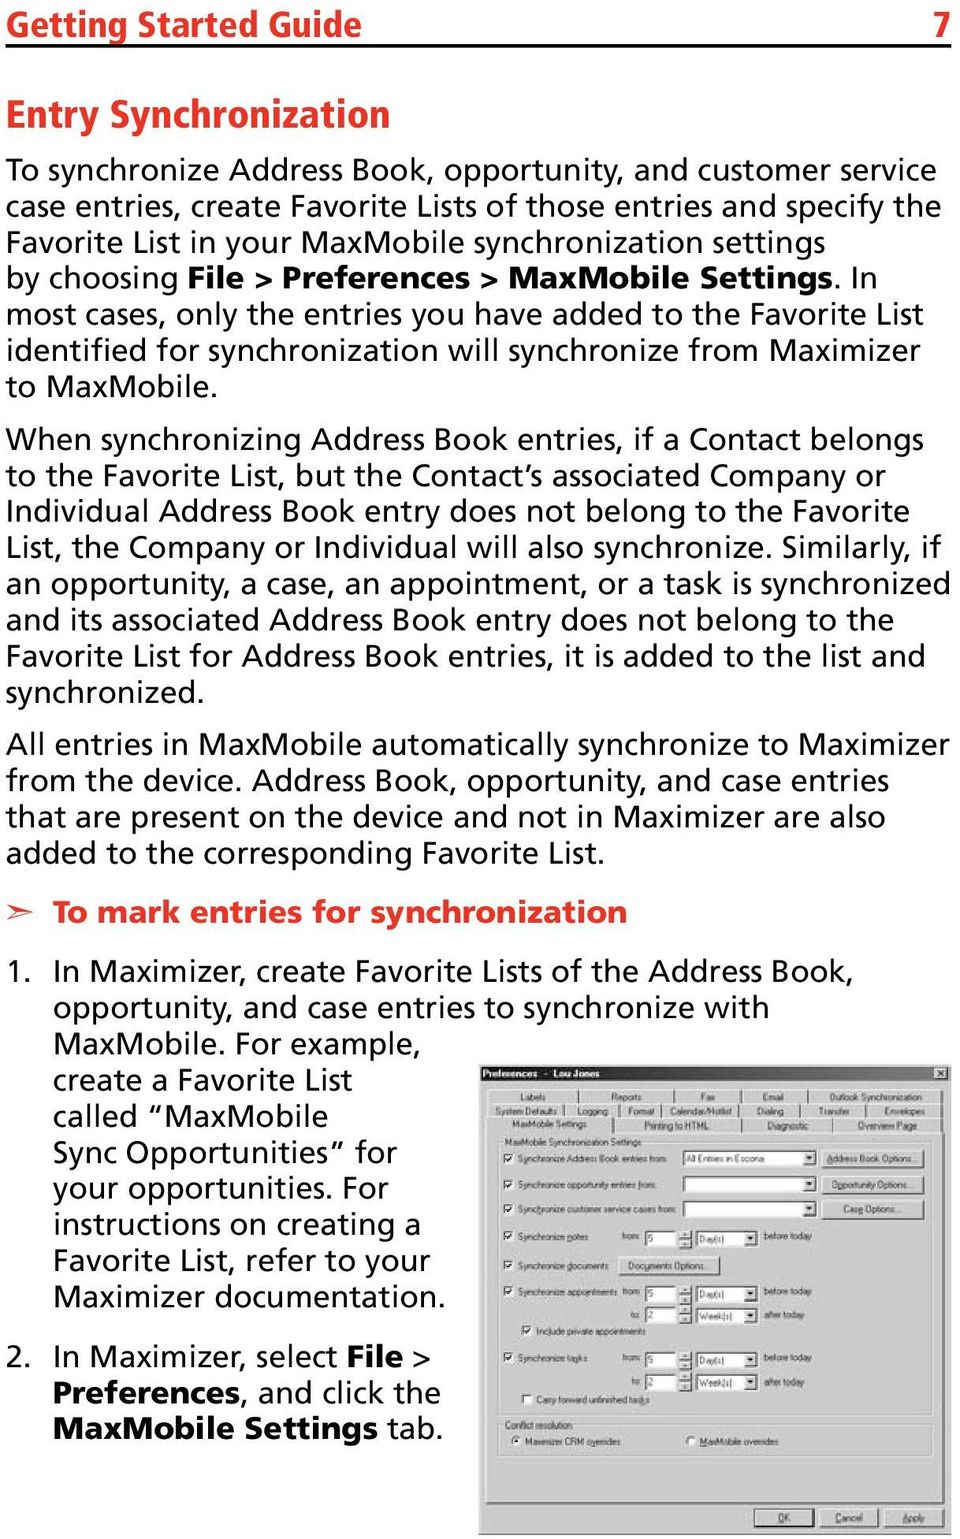 In most cases, only the entries you have added to the Favorite List identified for synchronization will synchronize from Maximizer to MaxMobile.